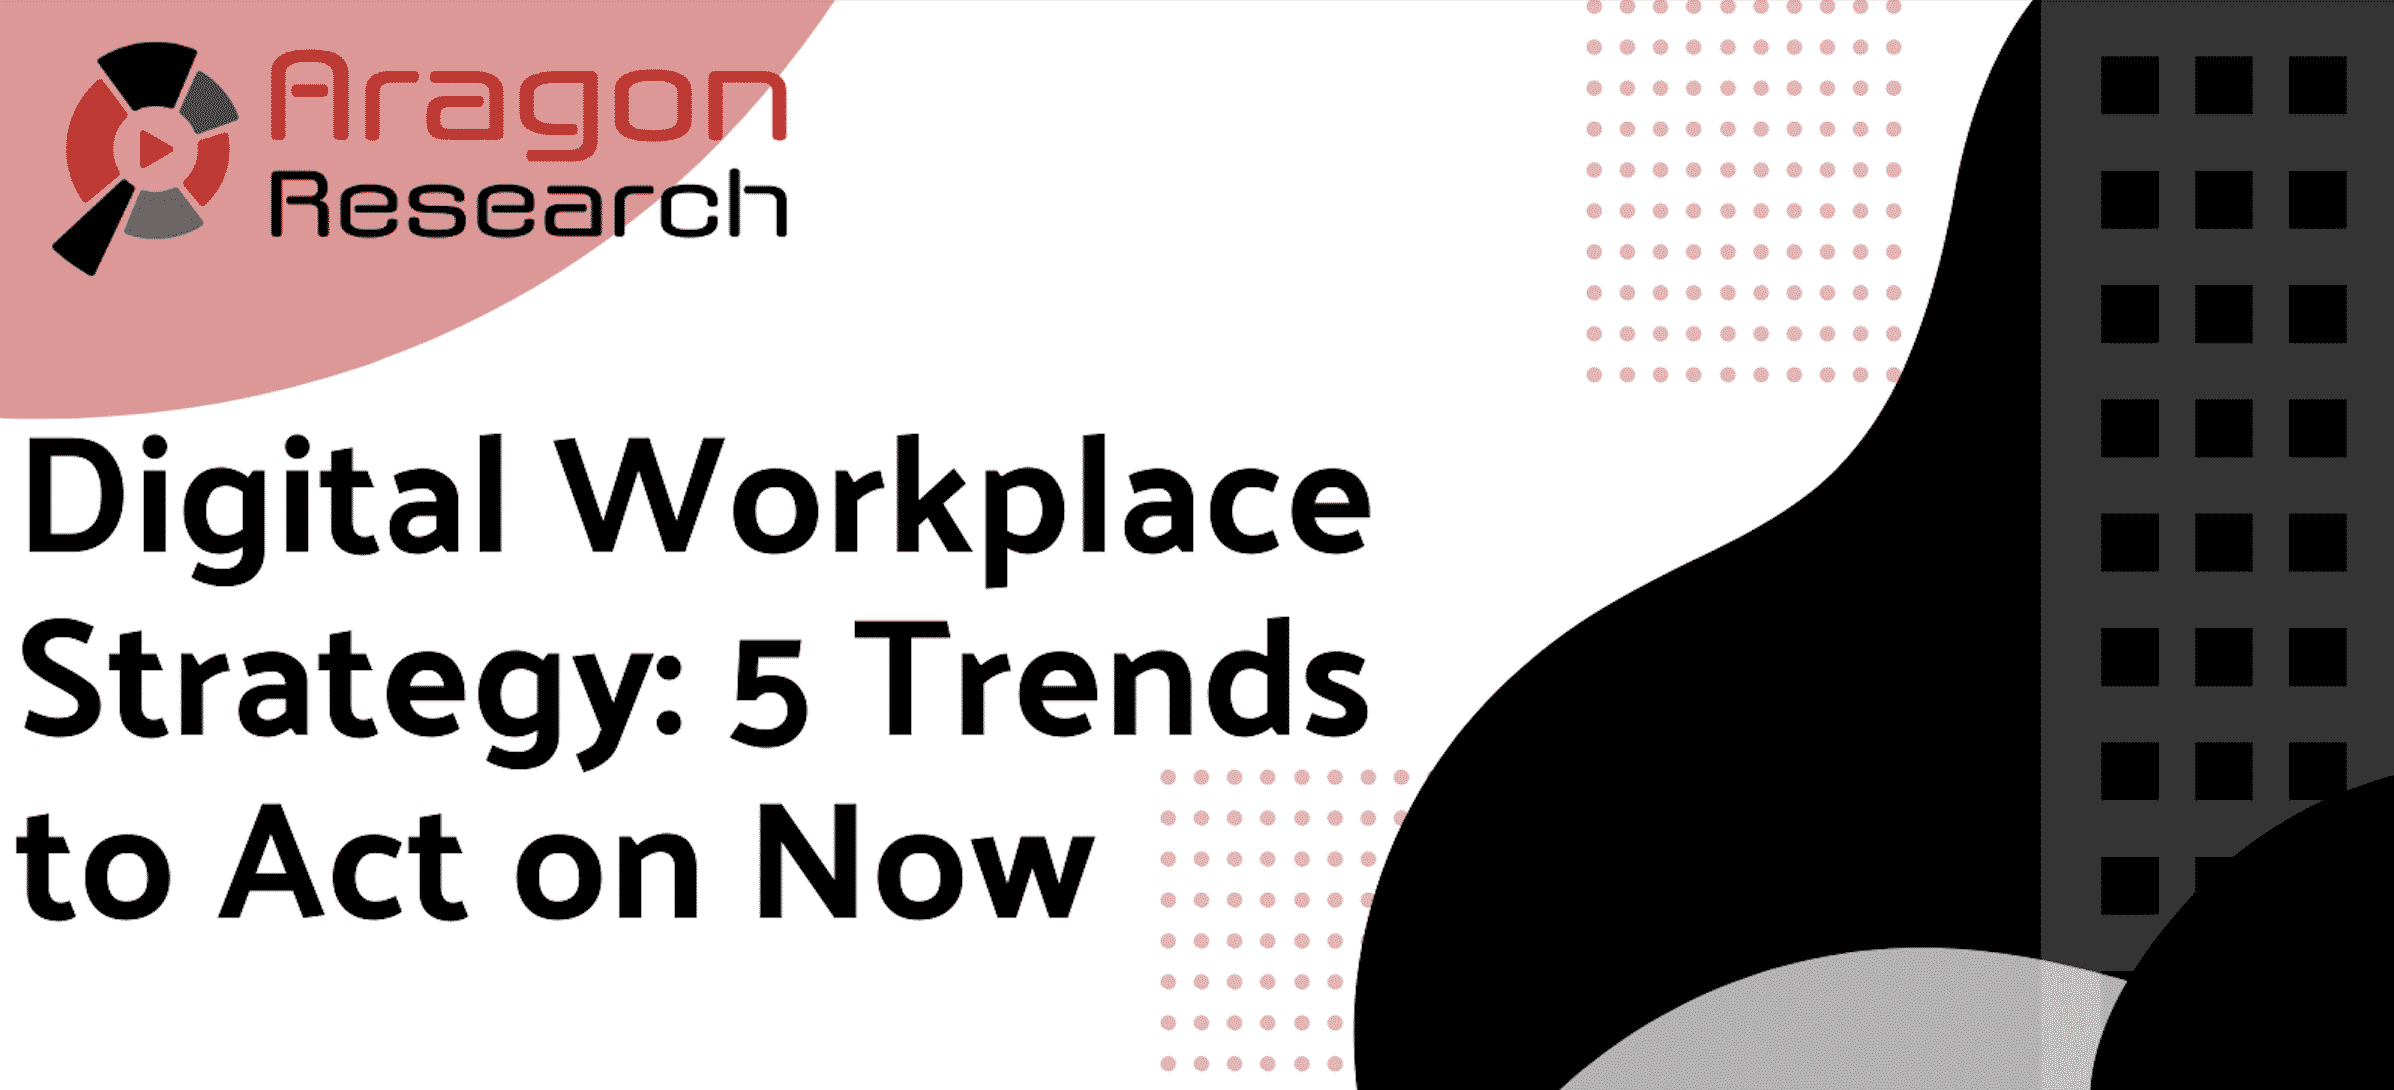 Digital Workplace Strategy: 5 Trends to Act on Now